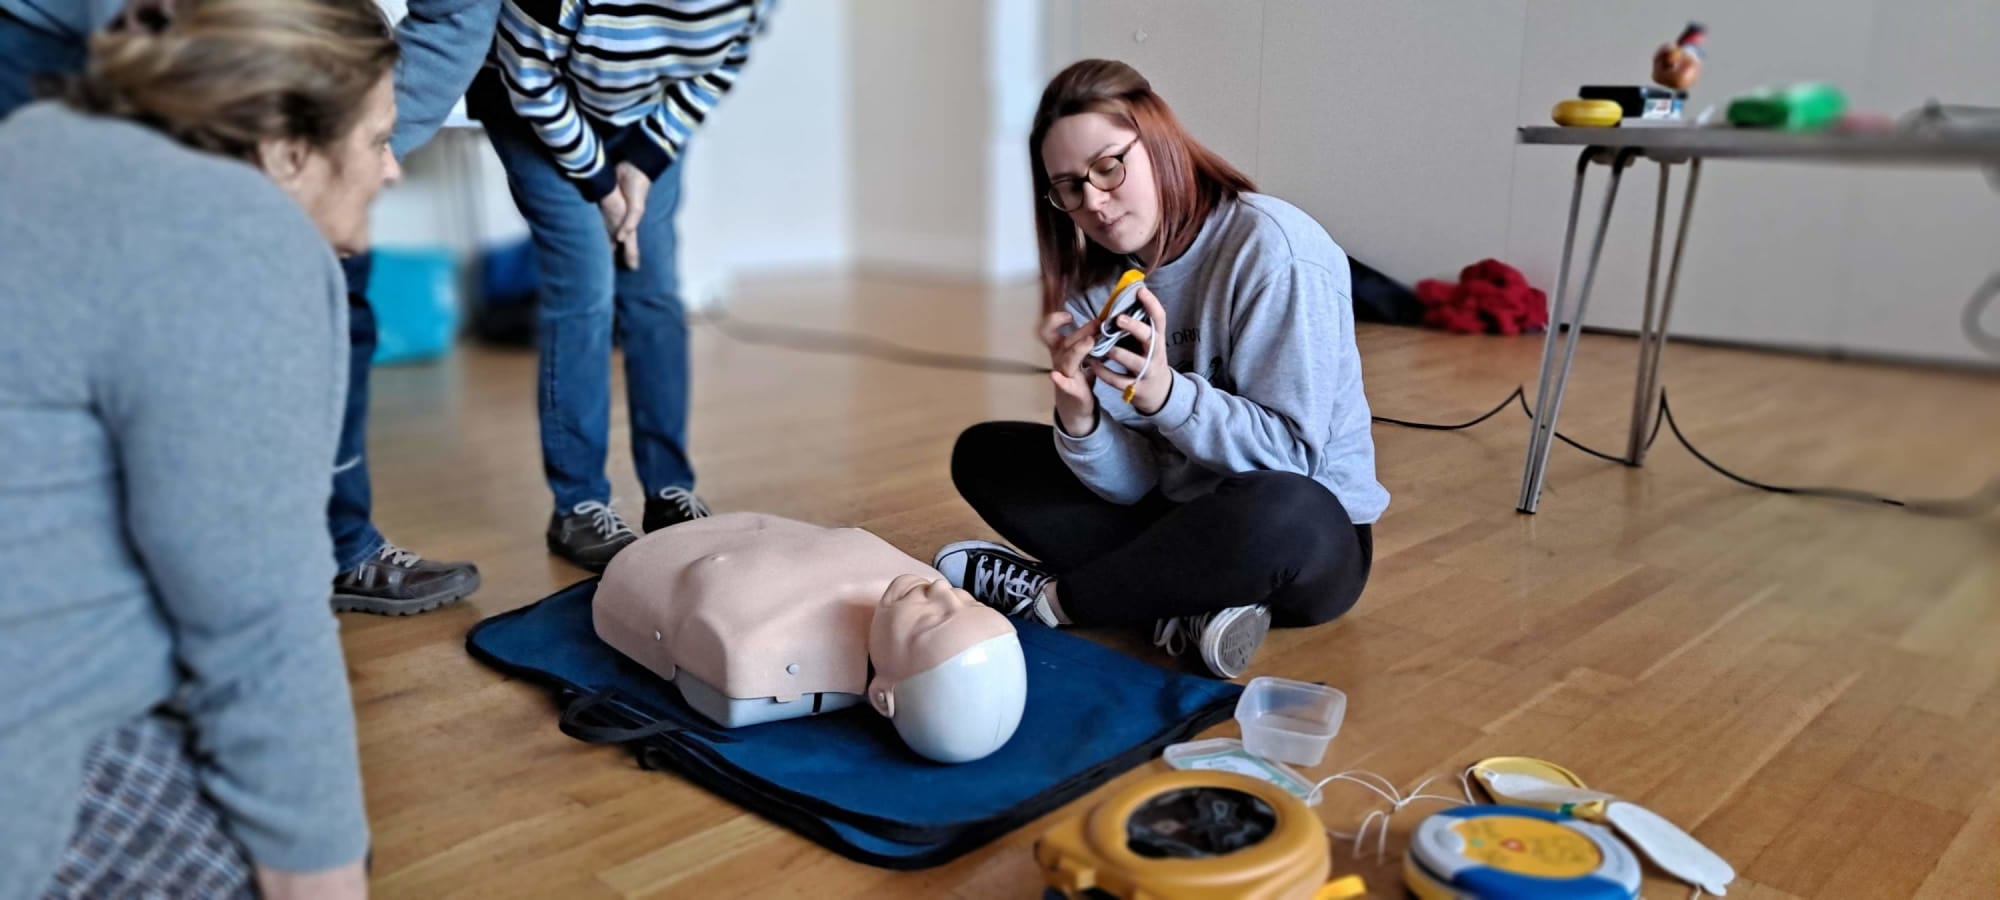 Save a Life AED Series workshop